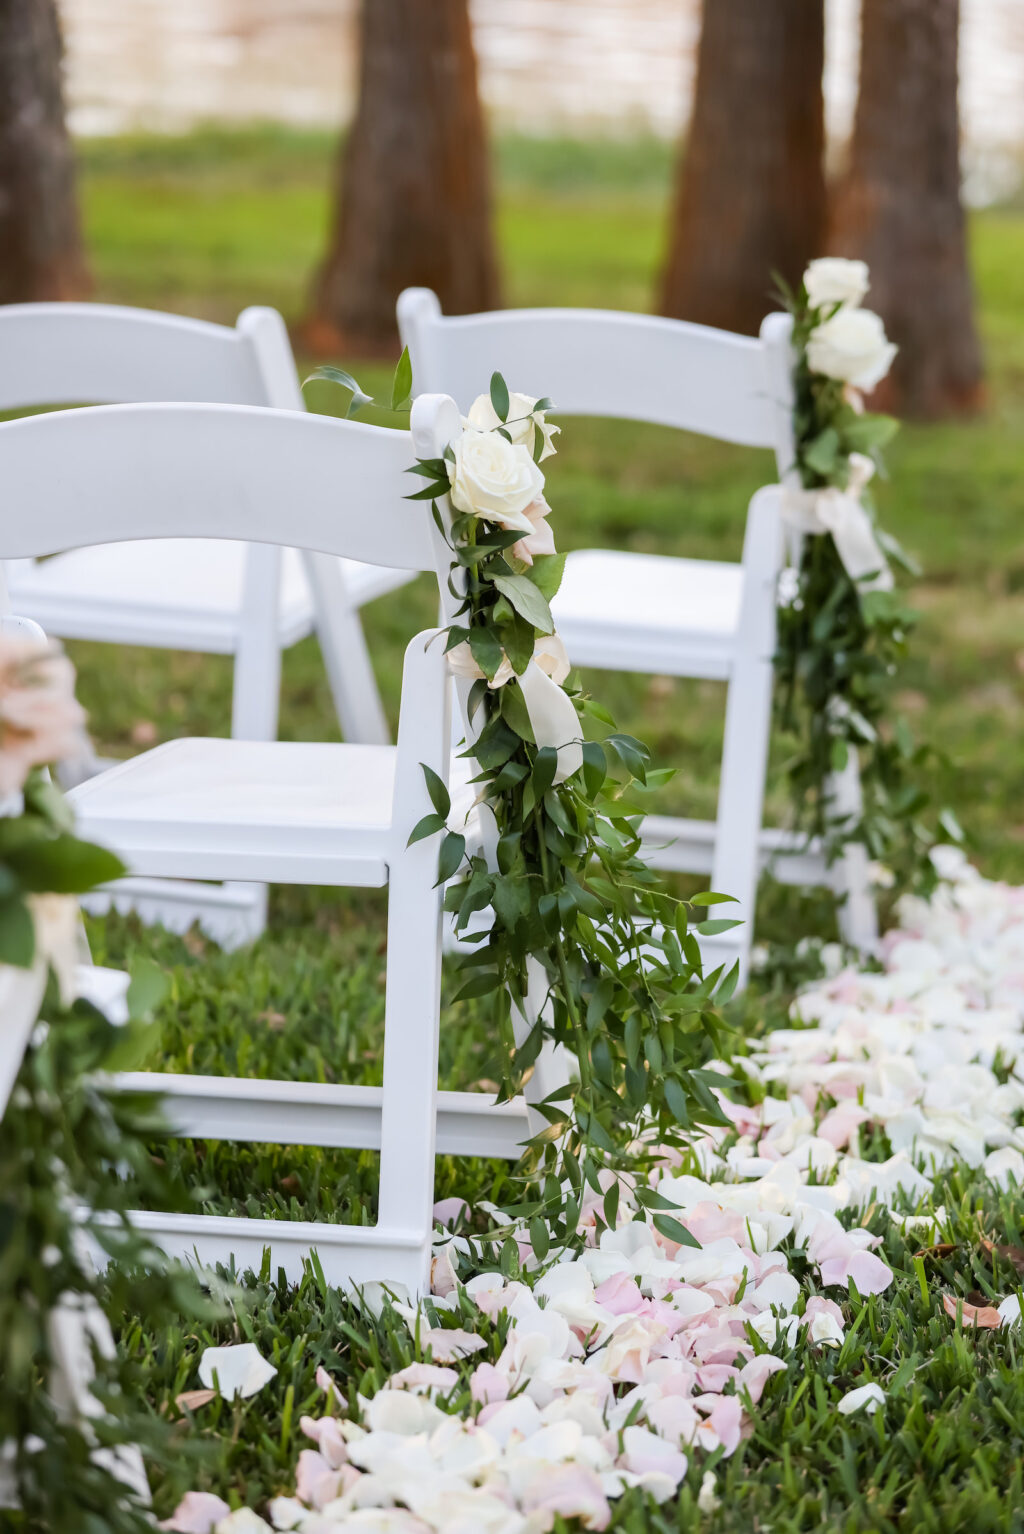 Romantic Classic Outdoor Wedding Ceremony Decor, White Folding Garden Chairs, Greenery and White Roses Arrangement on Chairs, Rose Petals | Tampa Bay Wedding Photographer Lifelong Photography Studio | Wedding Planner Special Moments Event Planning | Wedding Rentals Kate Ryan Event Rentals